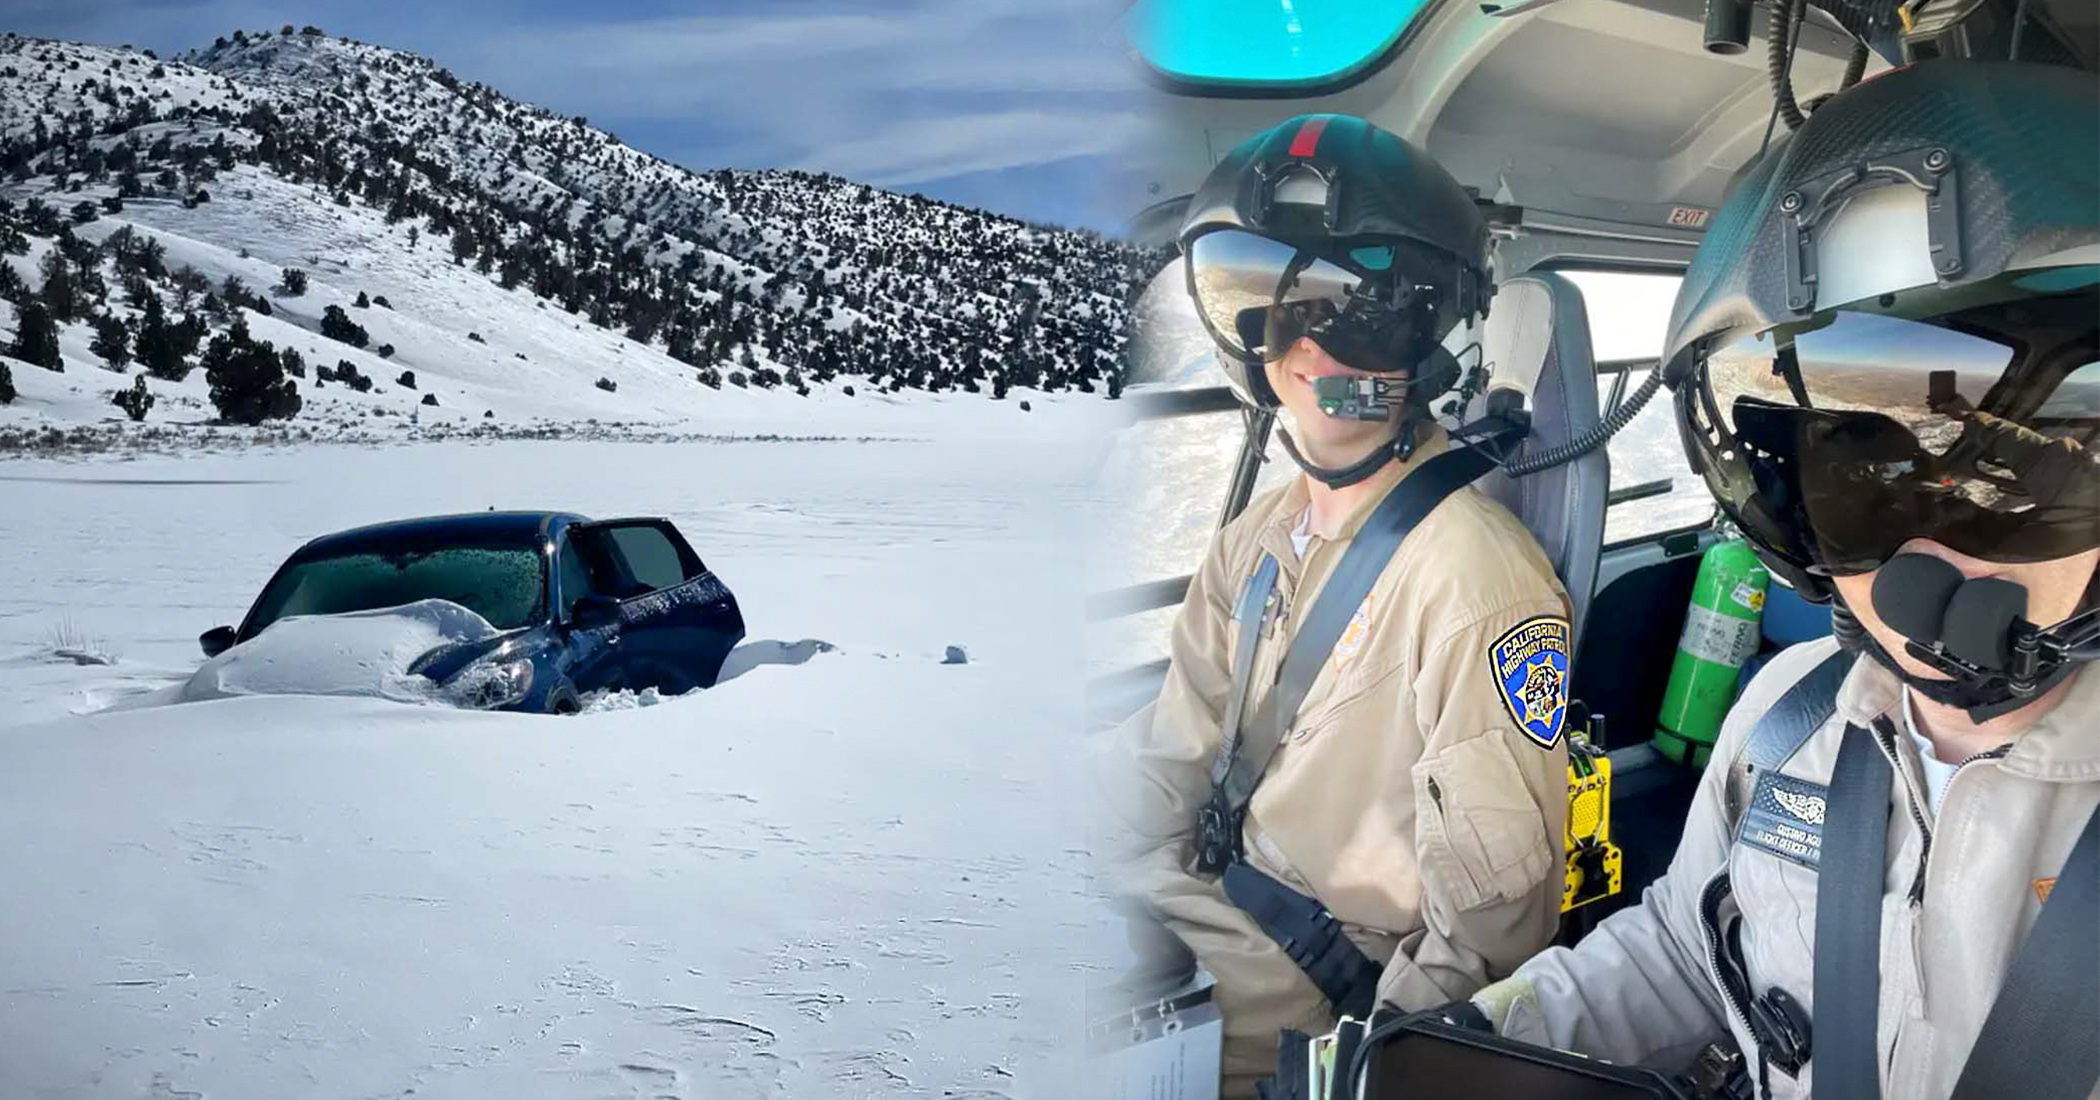 NextImg:81-year-old stranded in car by snowstorms in CA mountains for week survives on croissants, snow, rescued